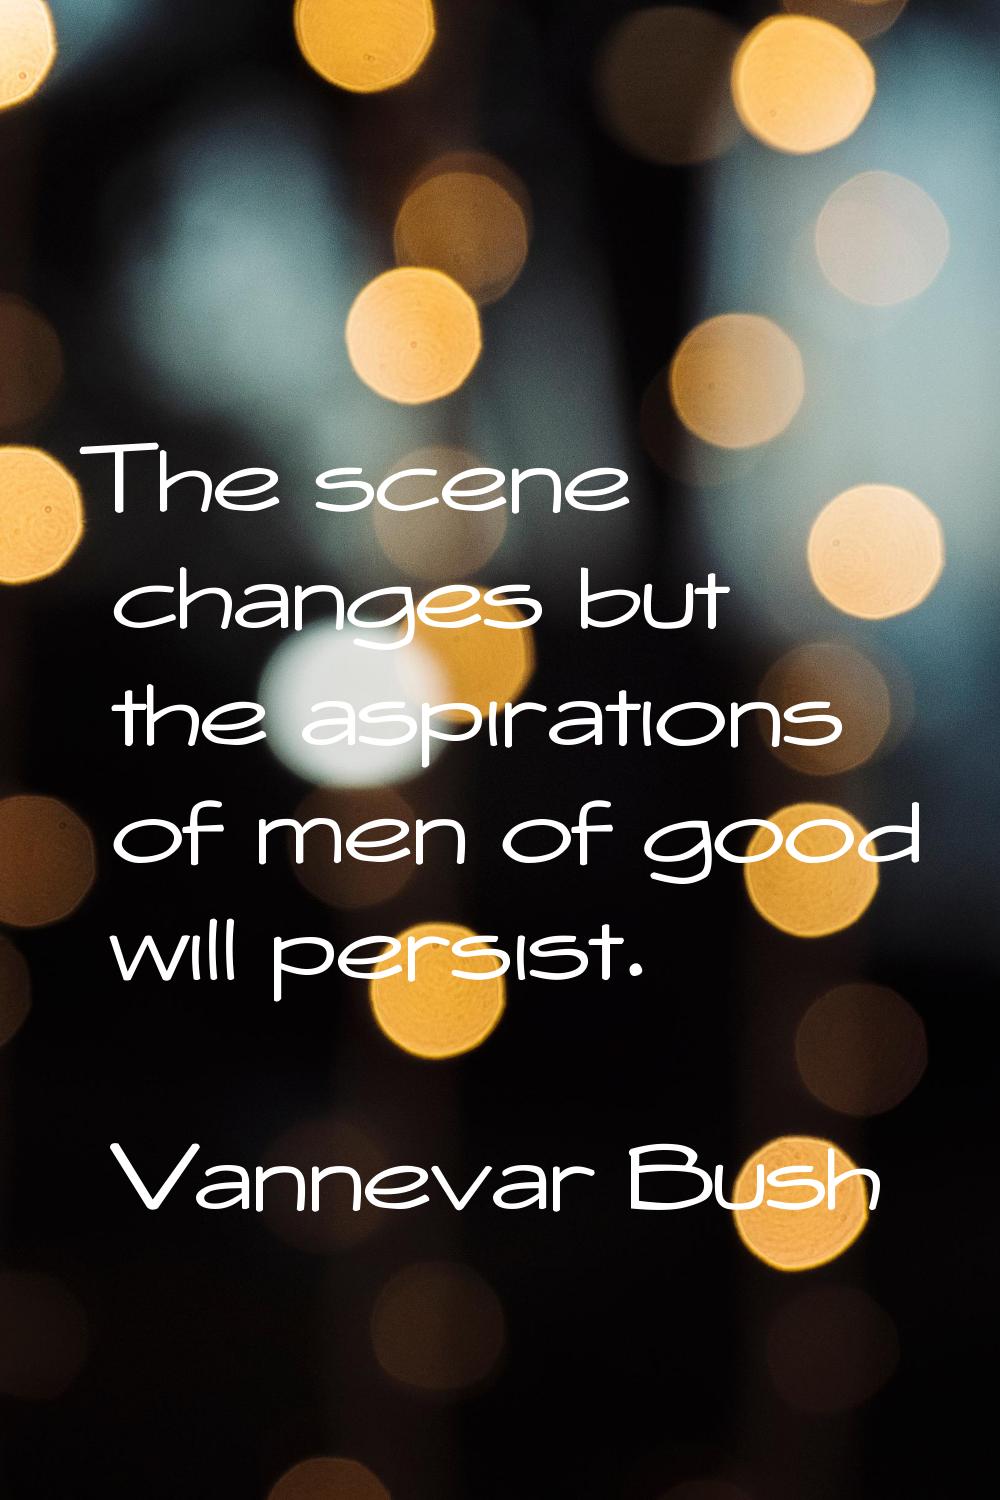 The scene changes but the aspirations of men of good will persist.